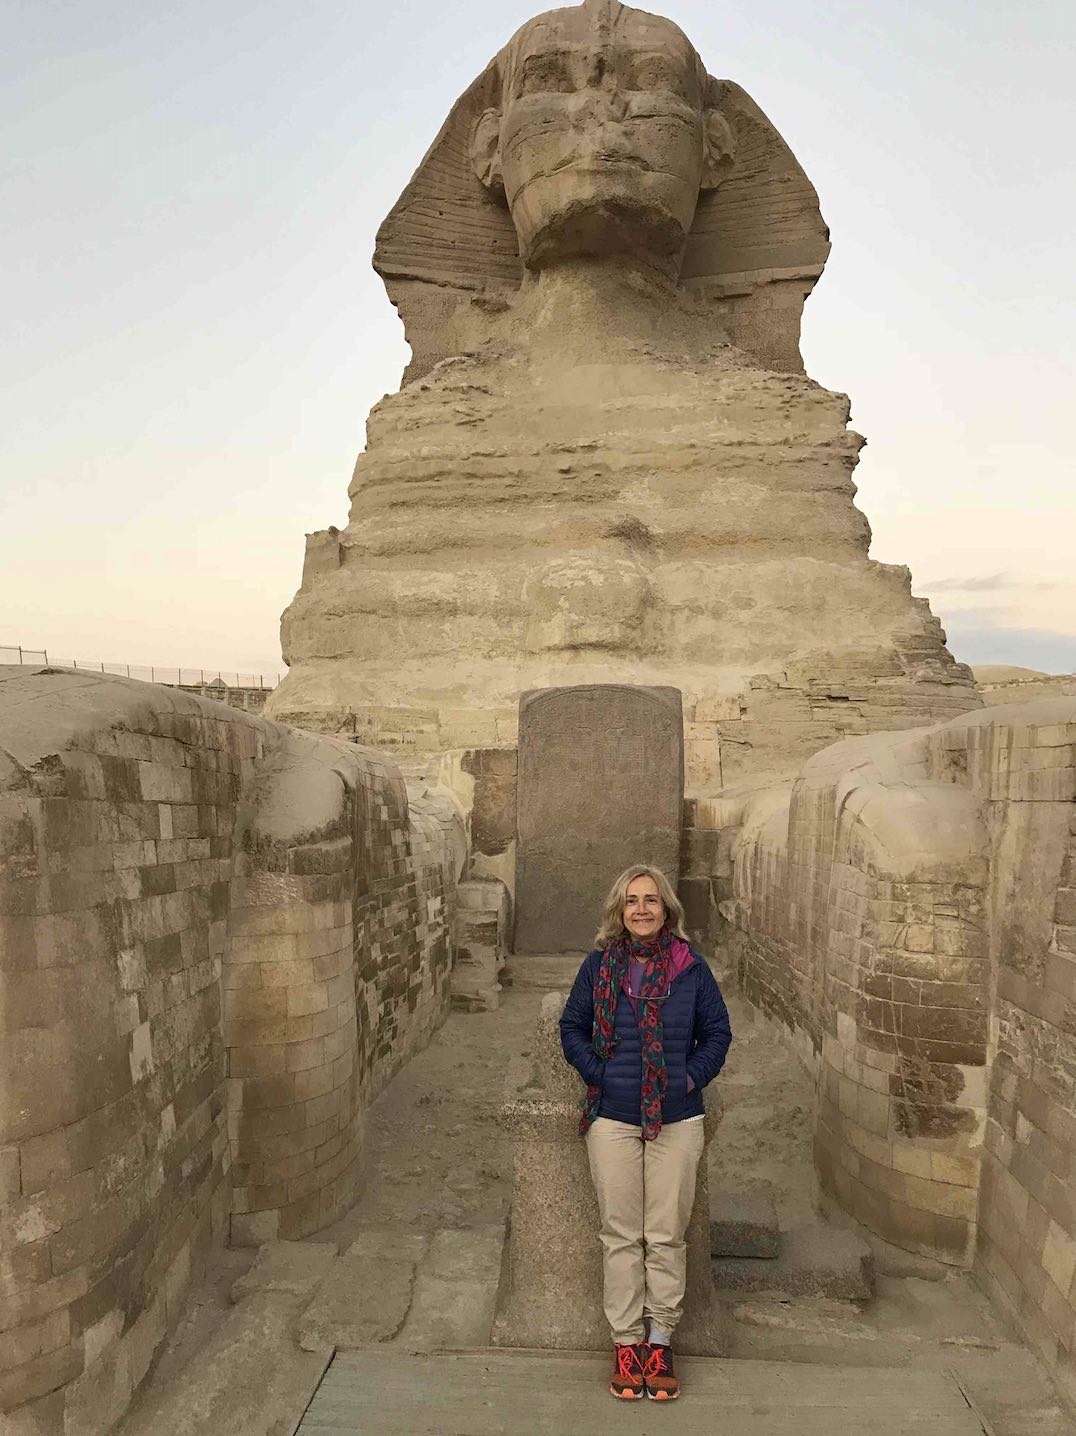 Gina Bakssa at the feet of the Sphinx